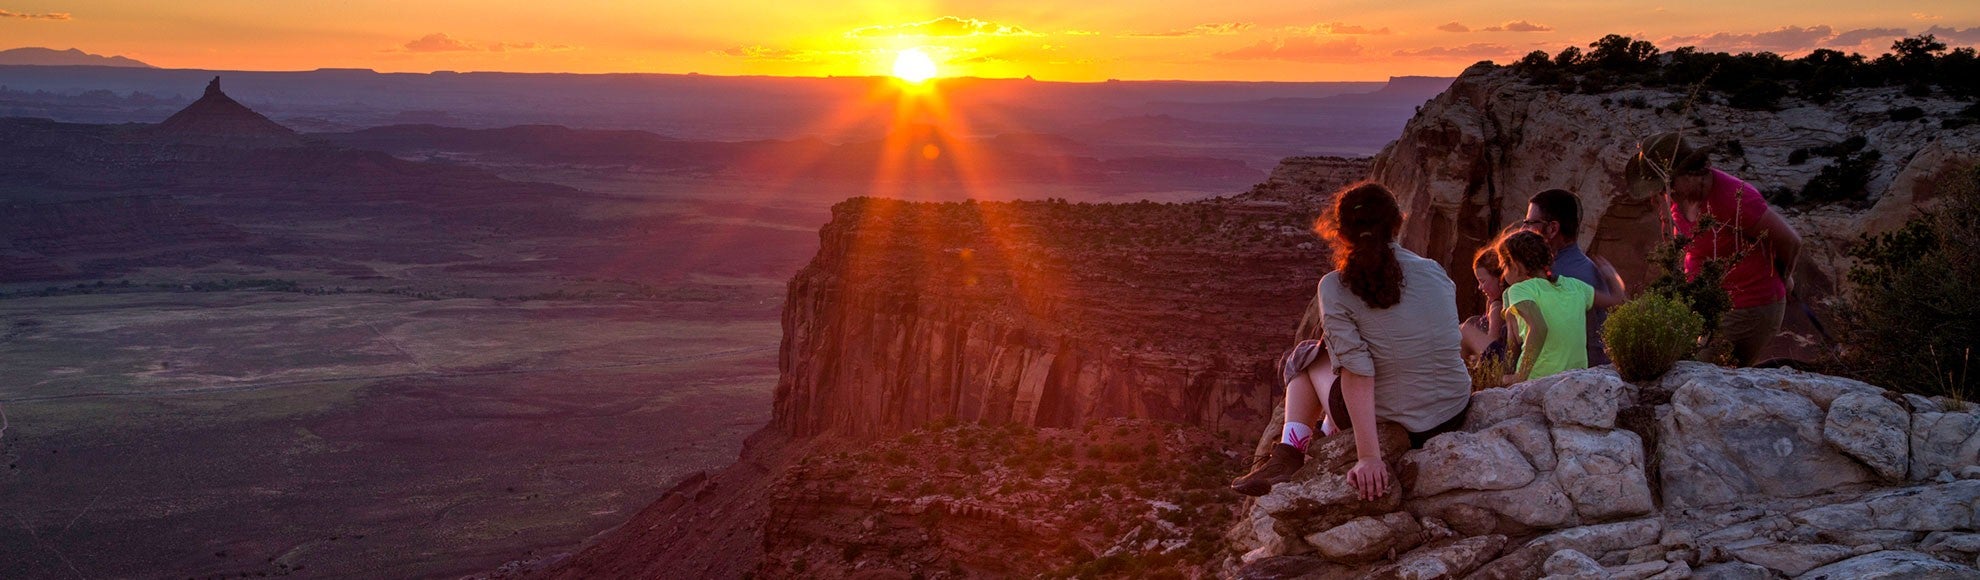 Visitors watch the sun set at Bears Ears National Monument.